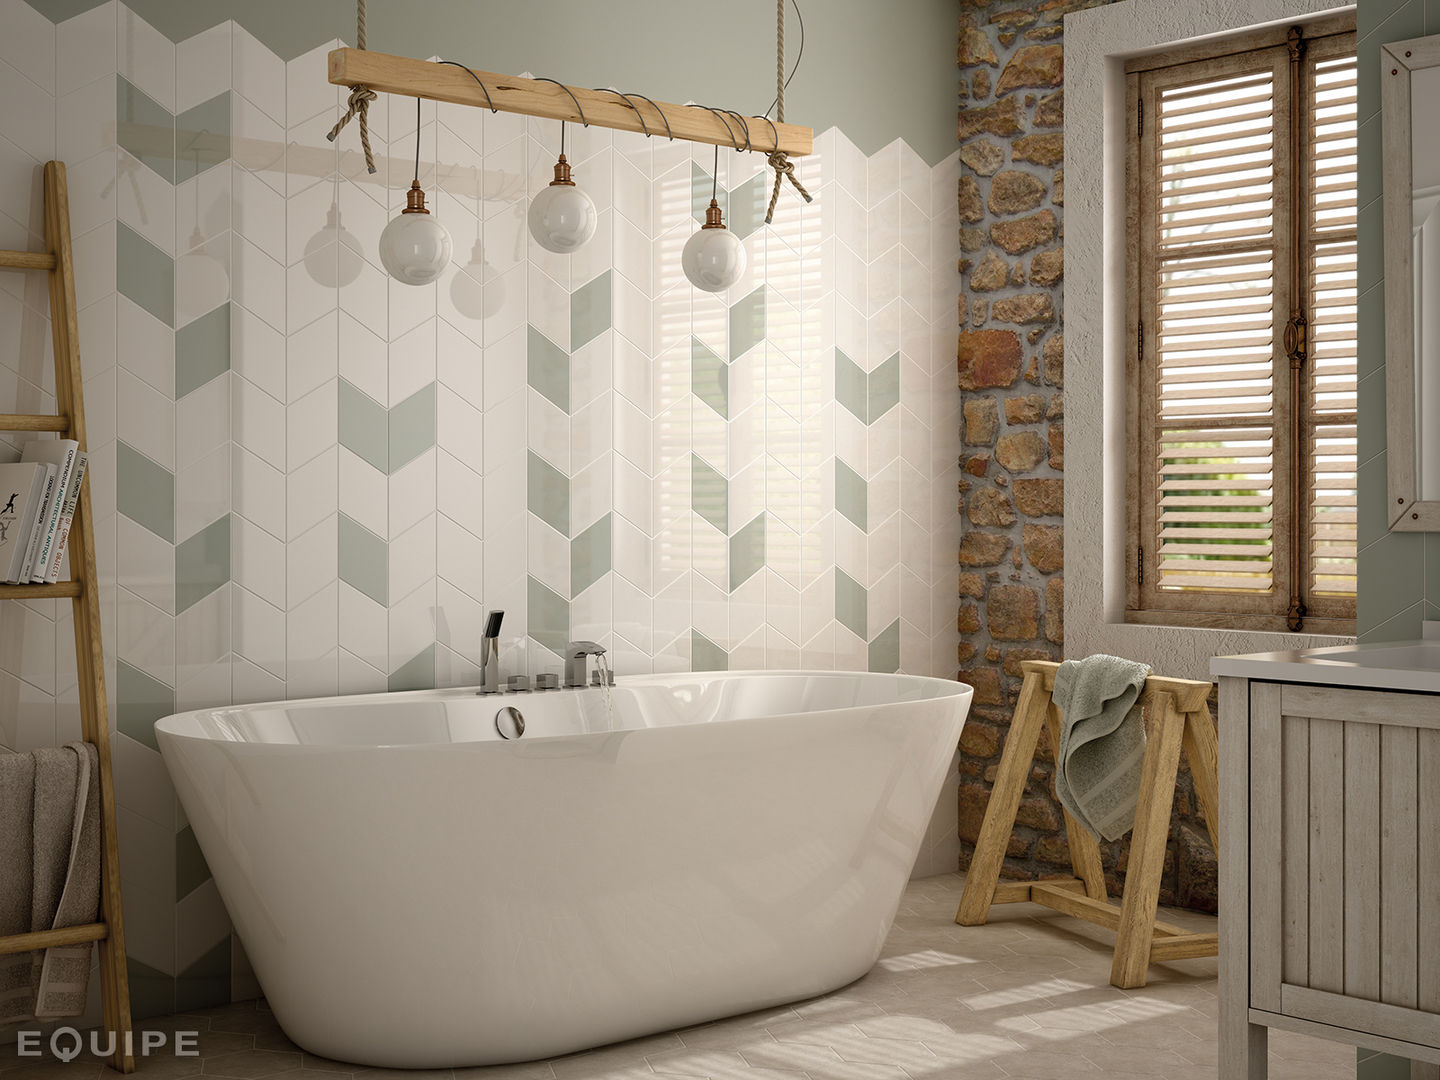 10 simple ways to renovate the bathroom | homify